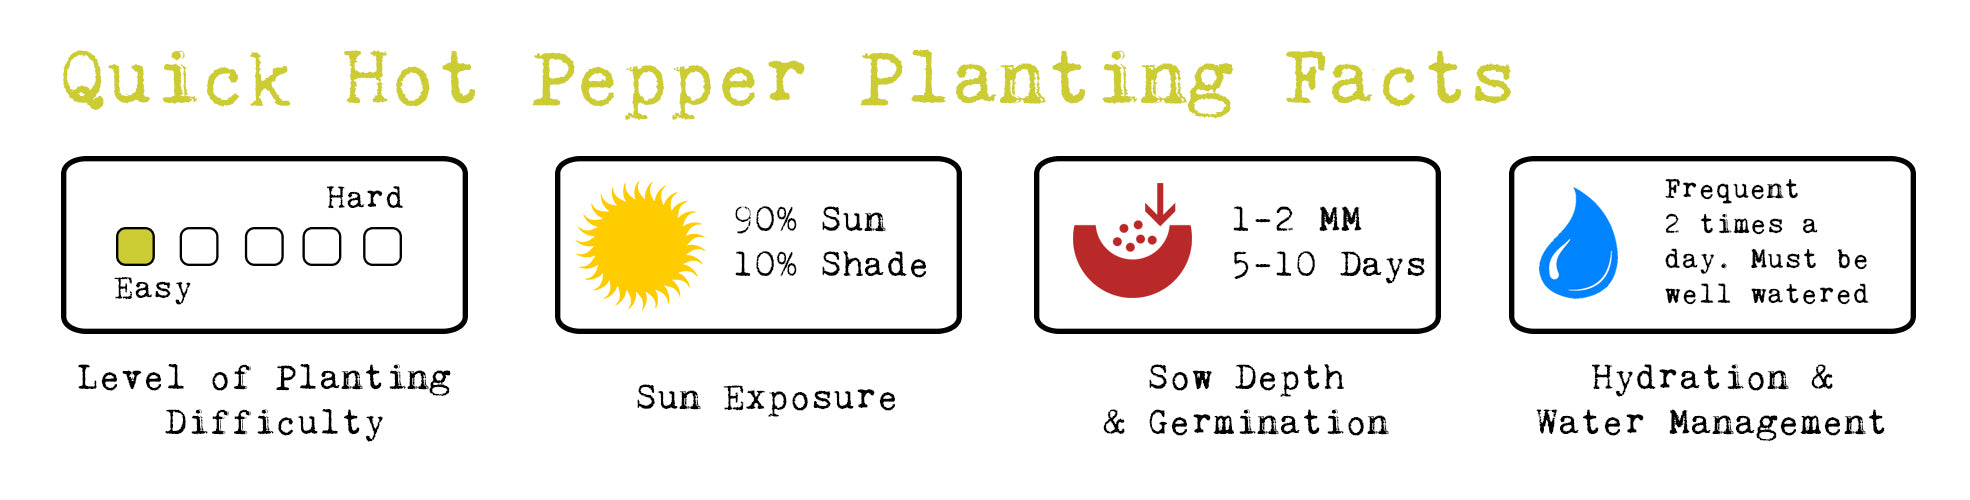 hot pepper planting facts